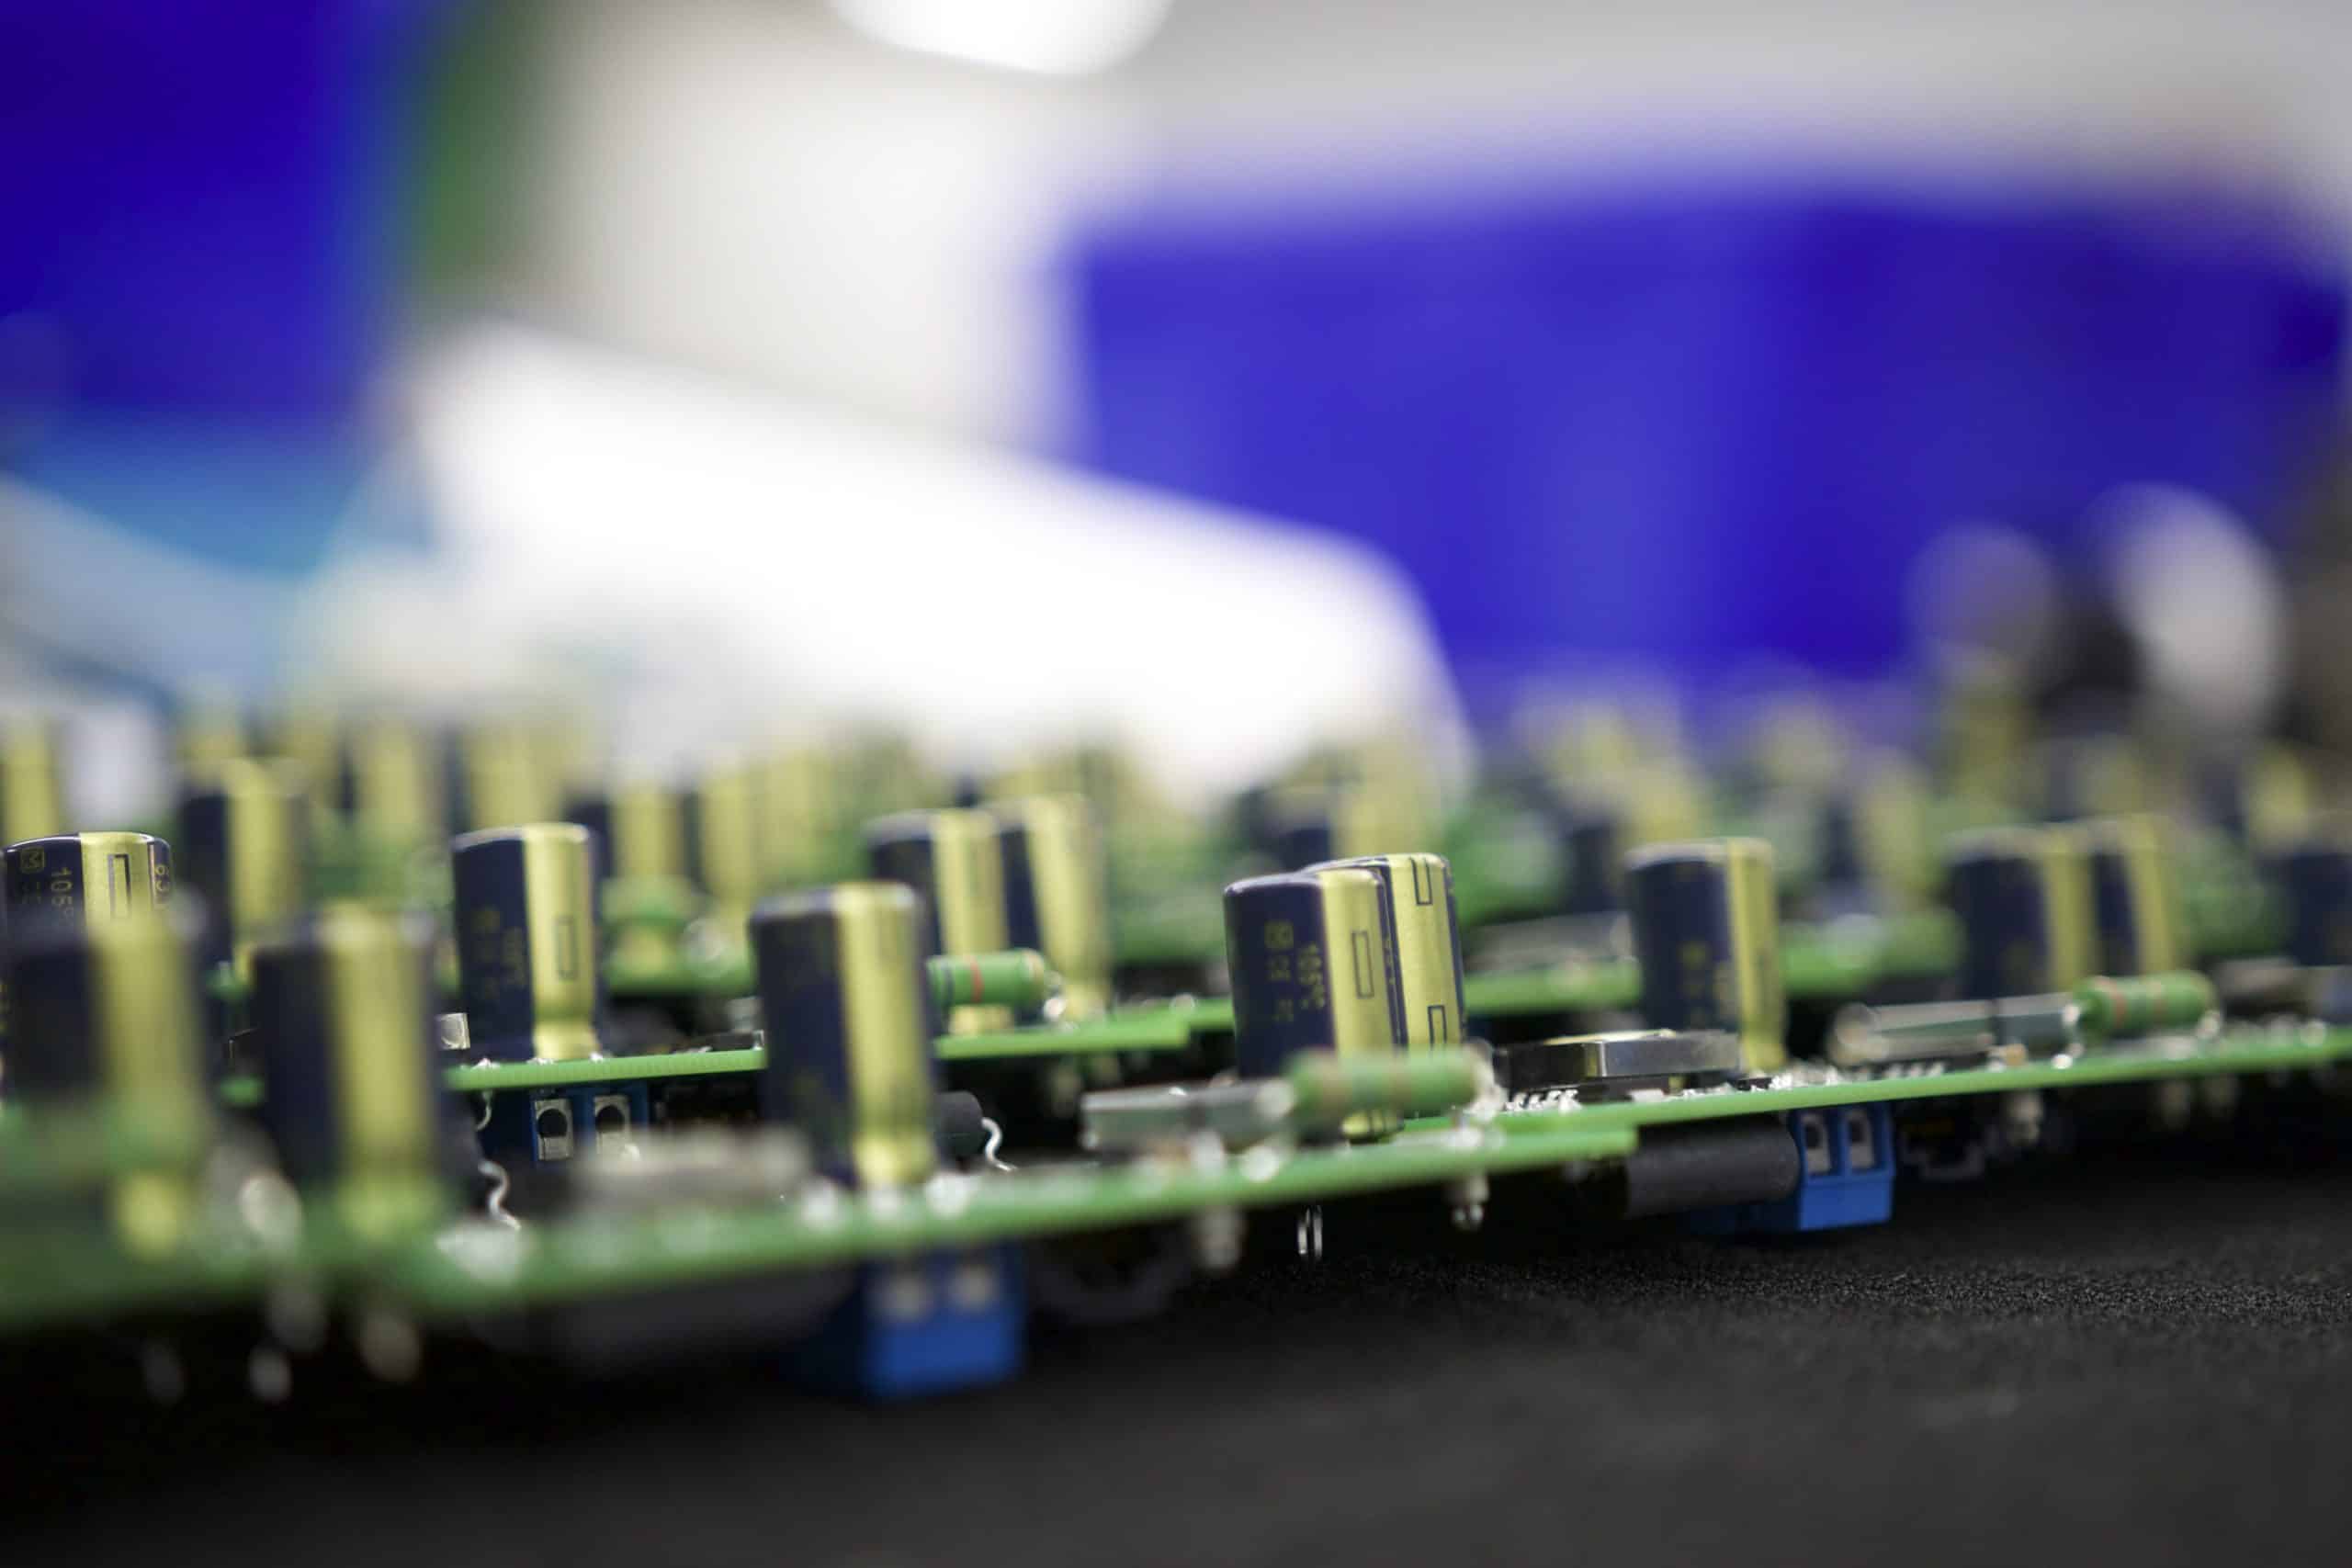 Custom Printed Circuit Board Manufacturing Serving The Tech Hub Of Boston And Beyond Liberty